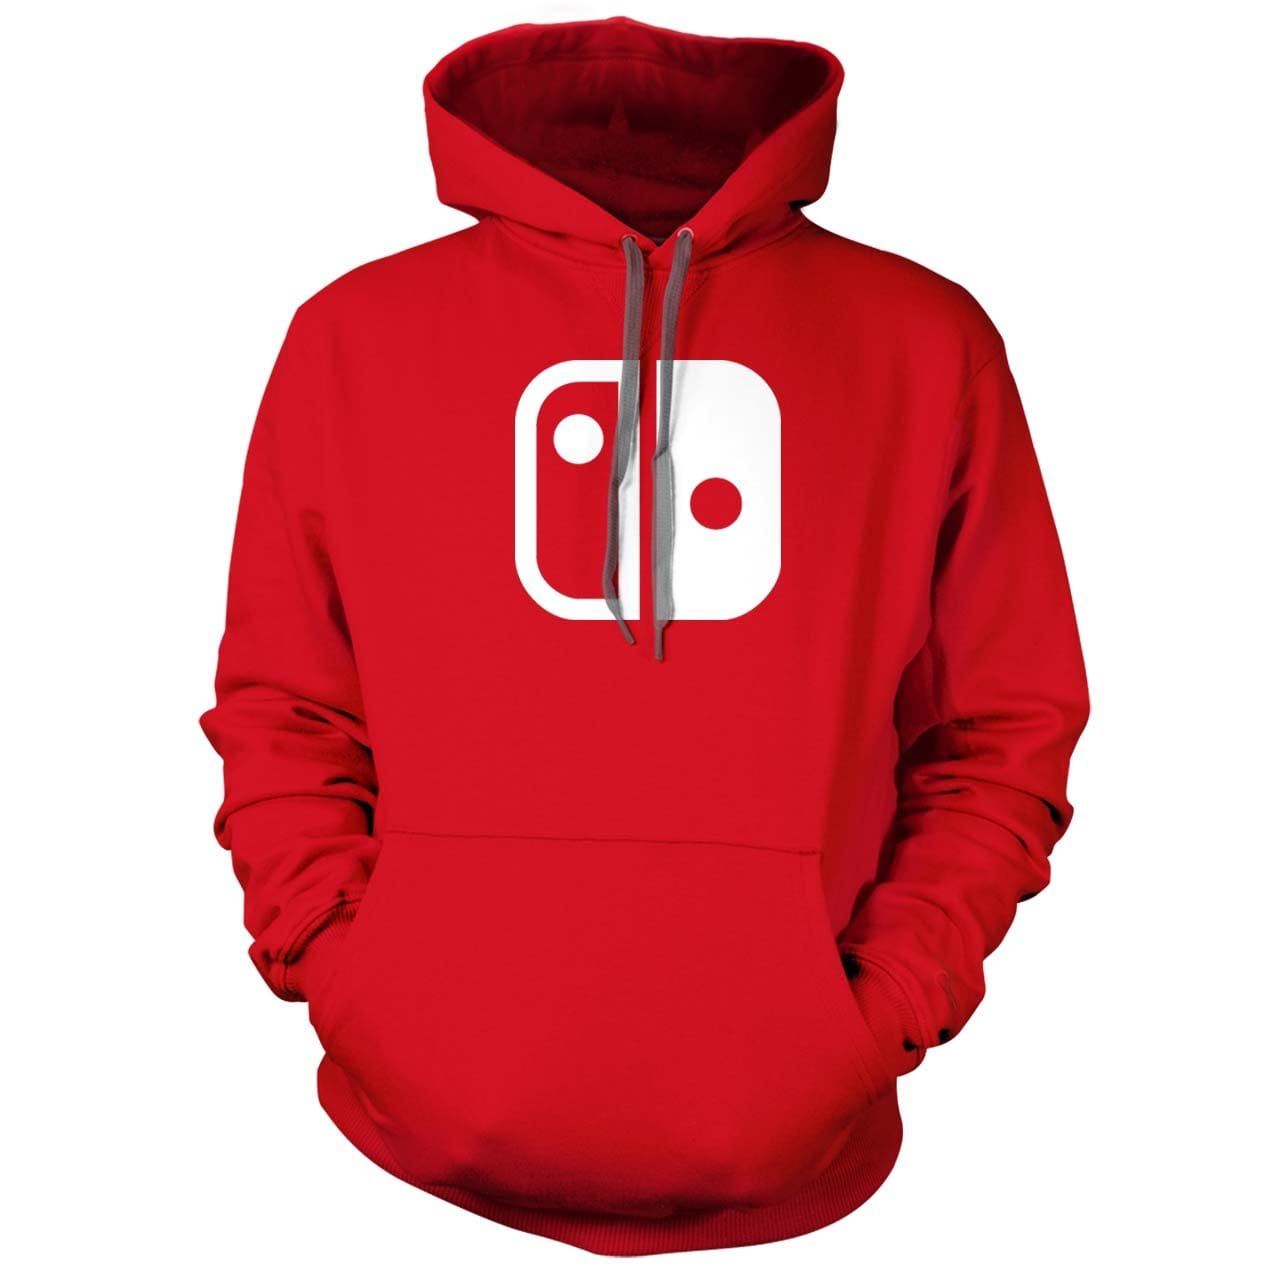 Nintendo Switch Red Hoodie